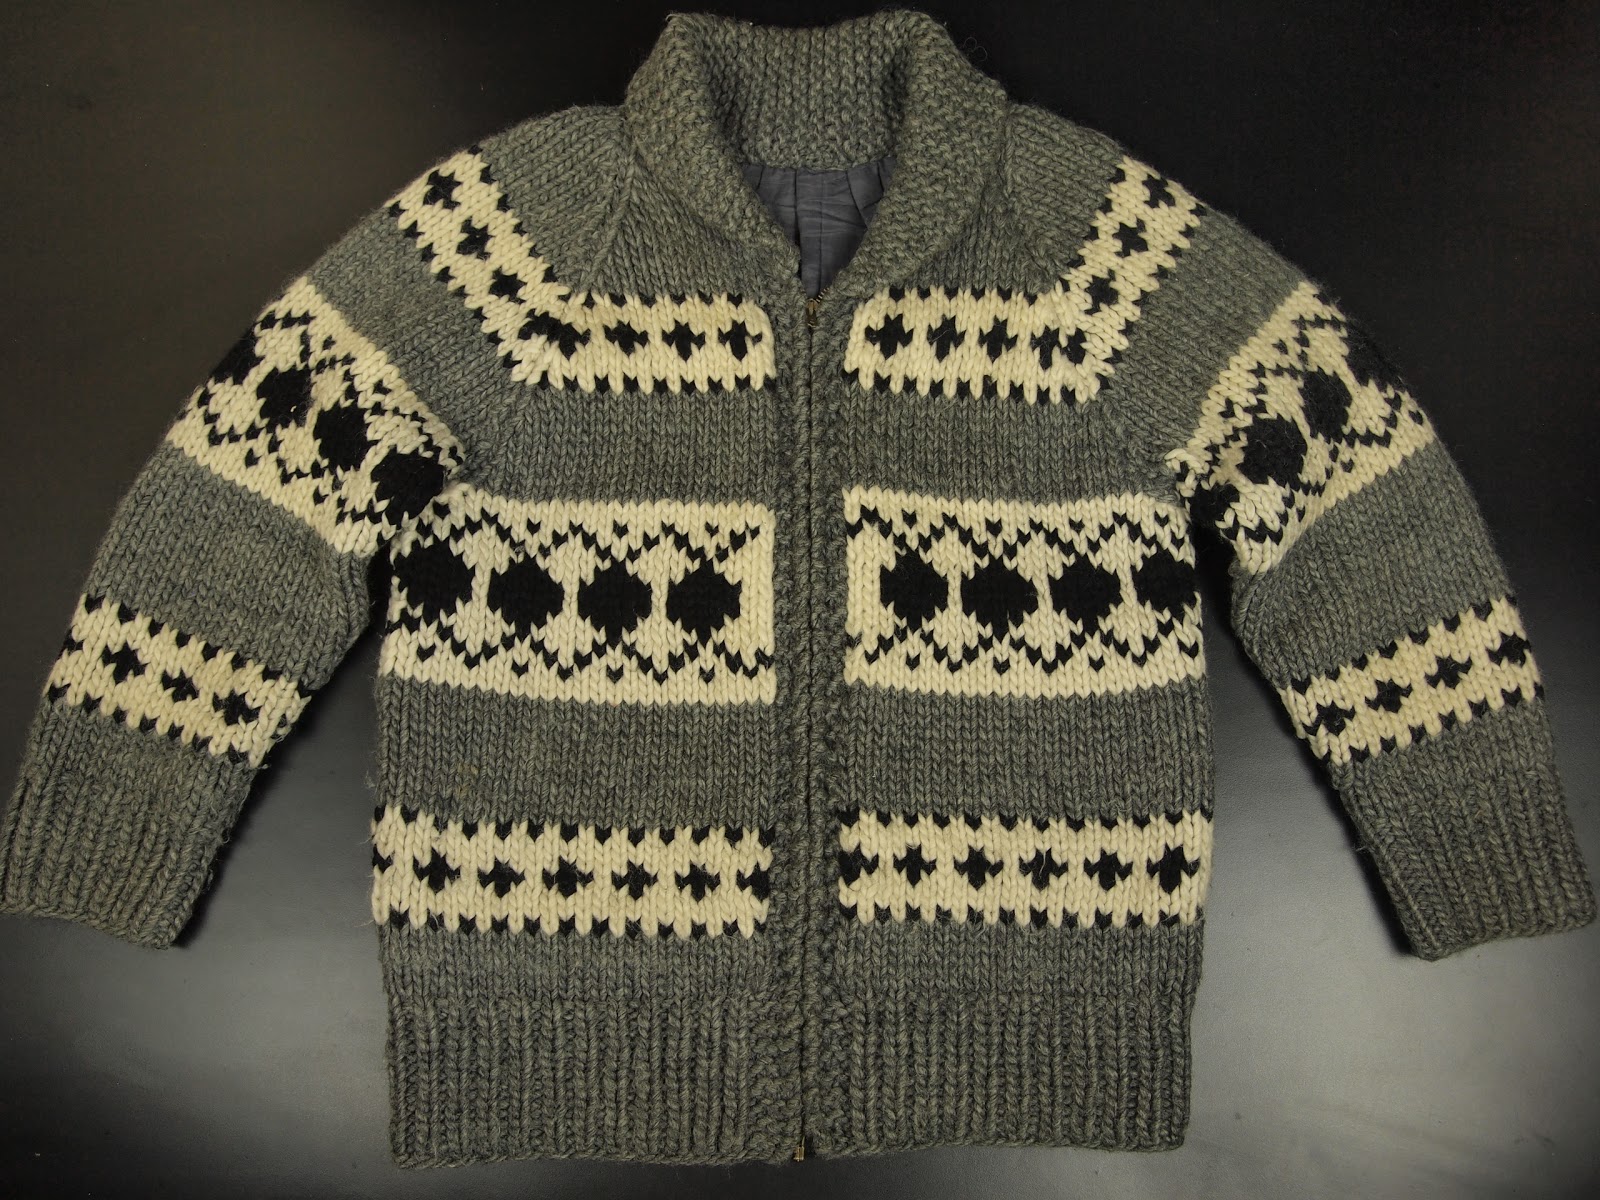 Stumptown Traders: Some Cowichan Sweaters: Staple of the Pacific ...